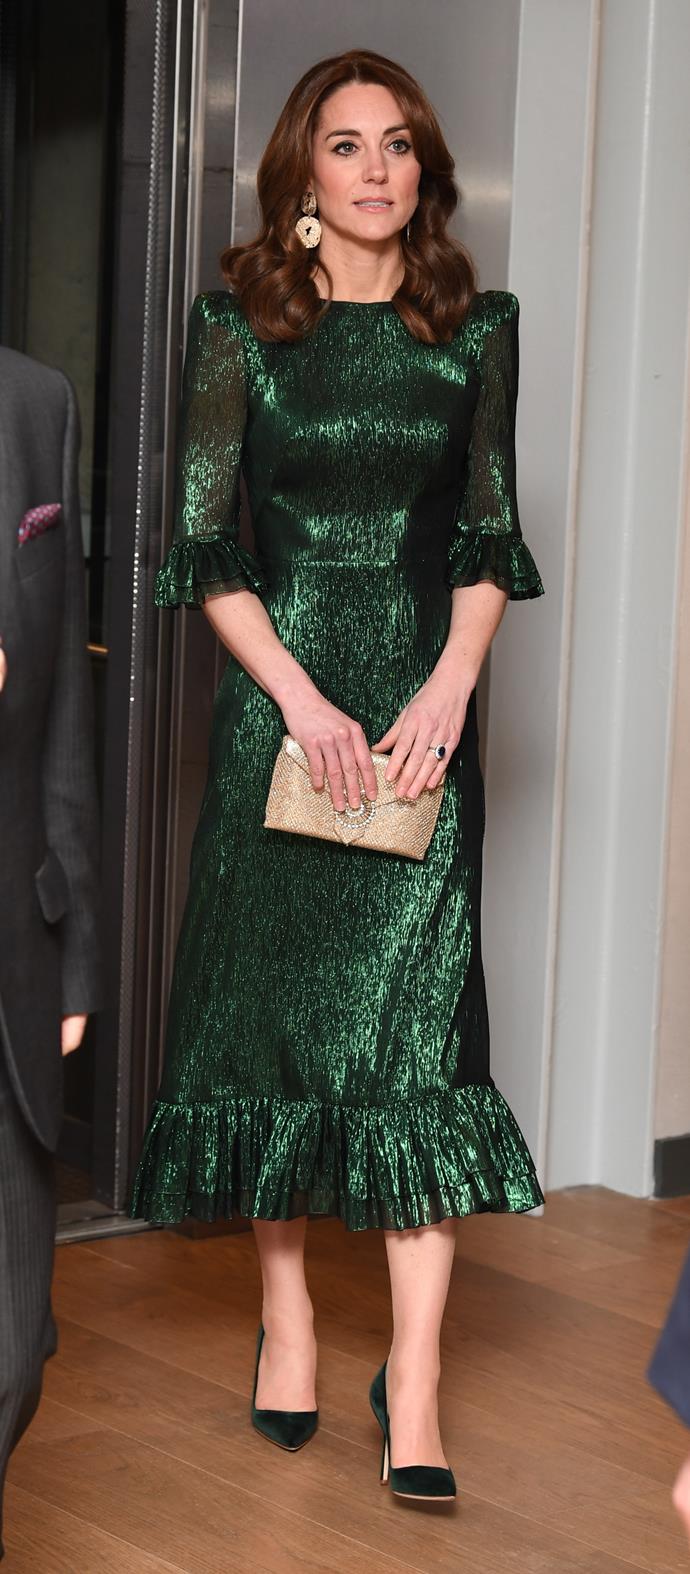 Her matching emerald green pumps were a delightful styling choice.